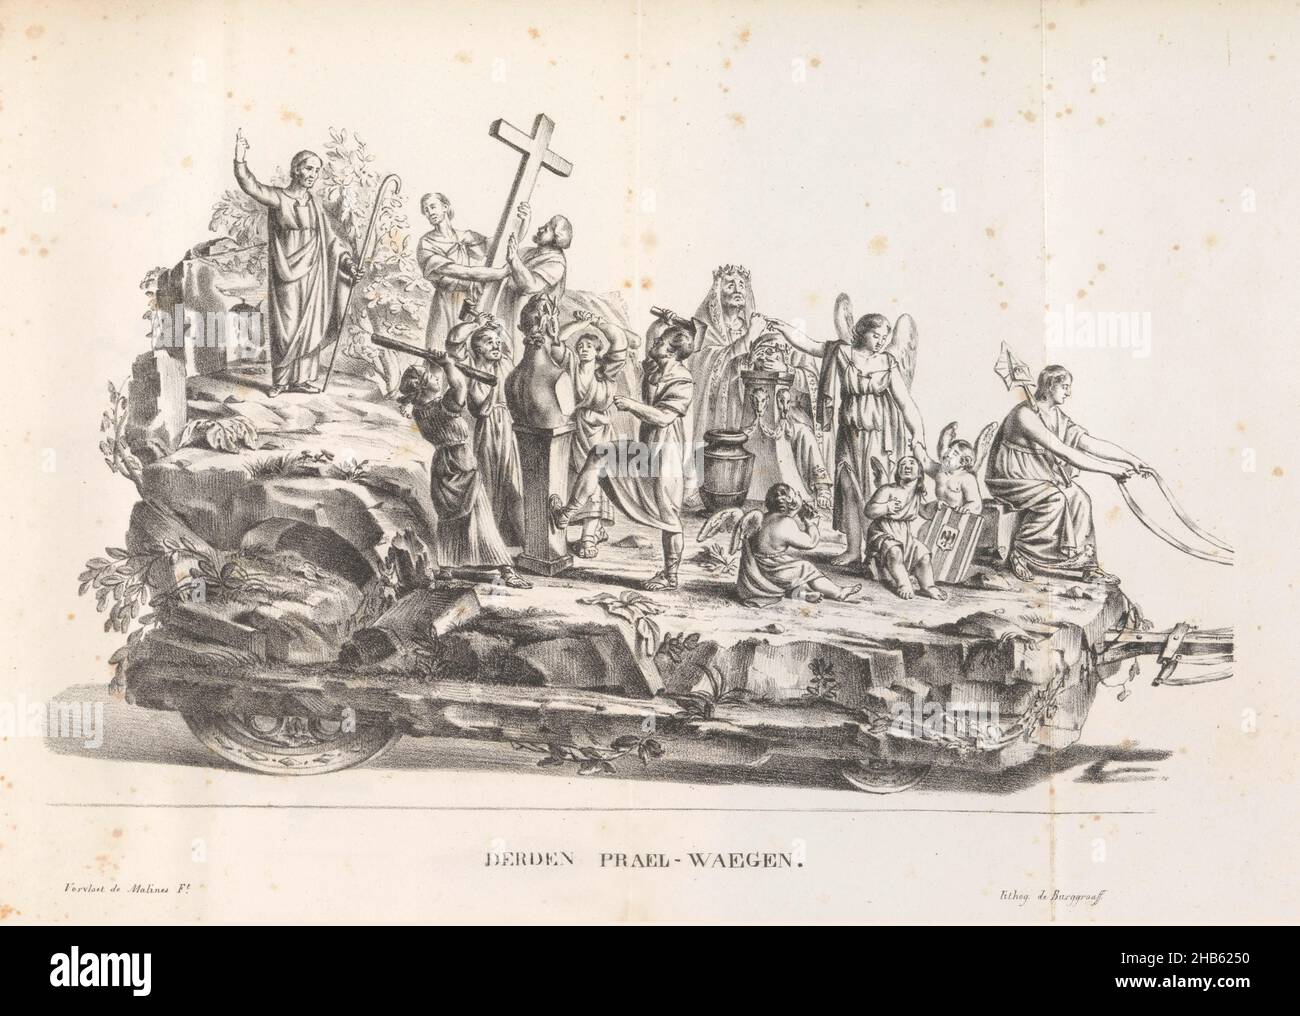 Third float in the procession for Saint Rombout, 1825, Derden Prael-waegen (title on object), The third float in the procession for Saint Rombout. On the float the preaching of Rombout and the destruction of idols in Mechelen. The procession was held on June 28, July 5 and 12, 1825. Illustration in a publication to mark the 50th anniversary in 1825 of the jubilee of Saint Rumoldus or Rombout, patron saint of the city of Mechelen., print maker: Frans Vervloet (mentioned on object), printer: Burggraaff (mentioned on object), print maker: Mechelen, printer: Brussels, publisher: Mechelen, 1825 Stock Photo